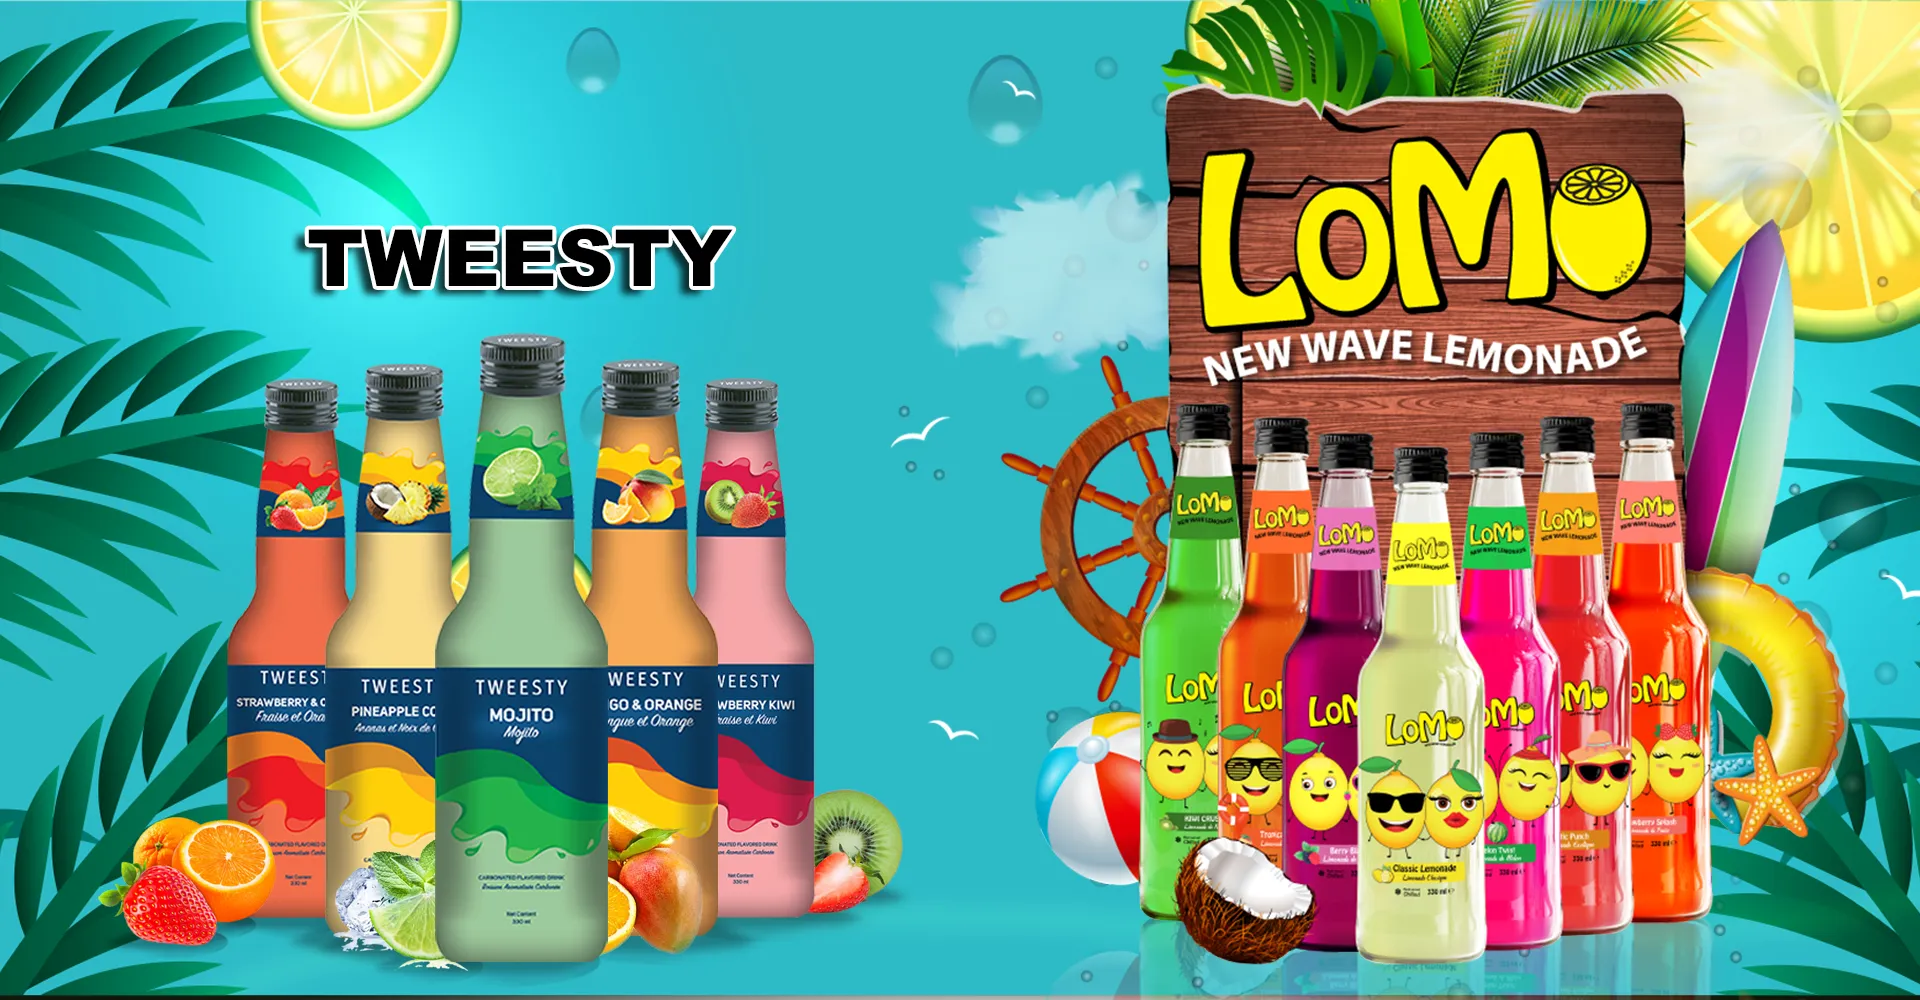 Colorful promotional banner for Tweesty and LOMO beverages, showcasing a variety of fruit-flavored drinks against a vibrant tropical backdrop.